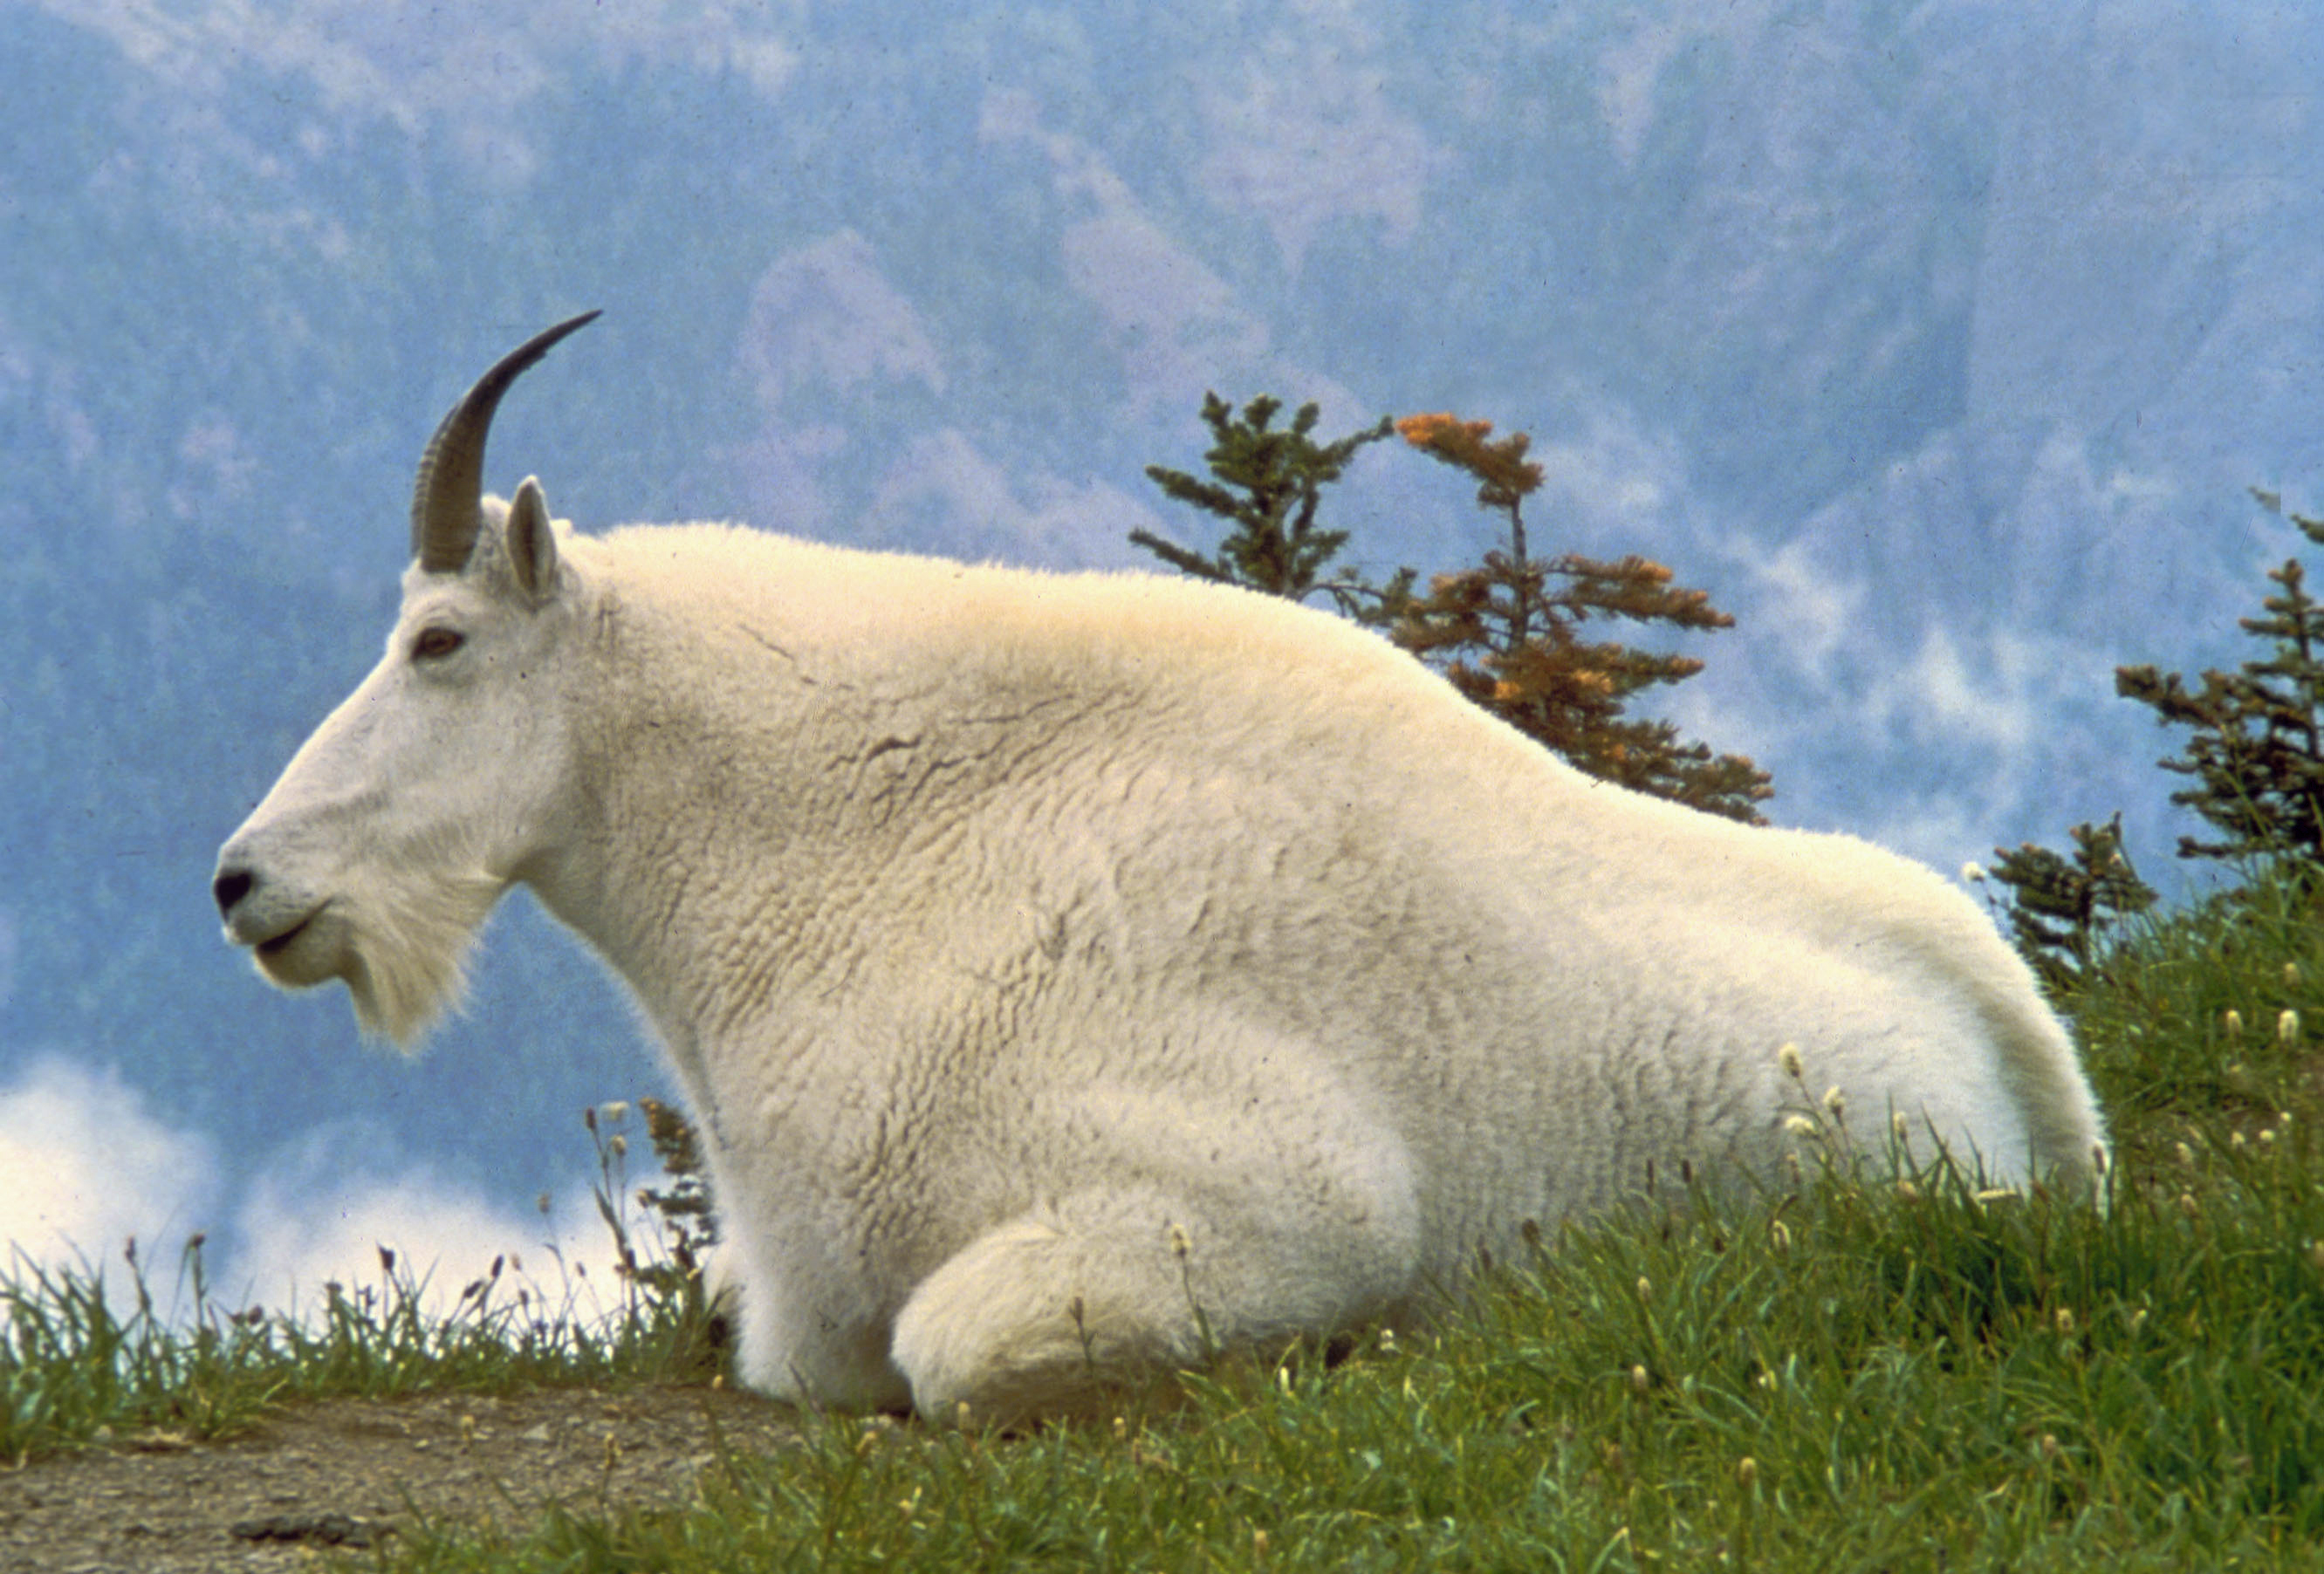 The Mountain Goat (Oreamnos americanus) is the official symbol of Glacier National Park, Montana.